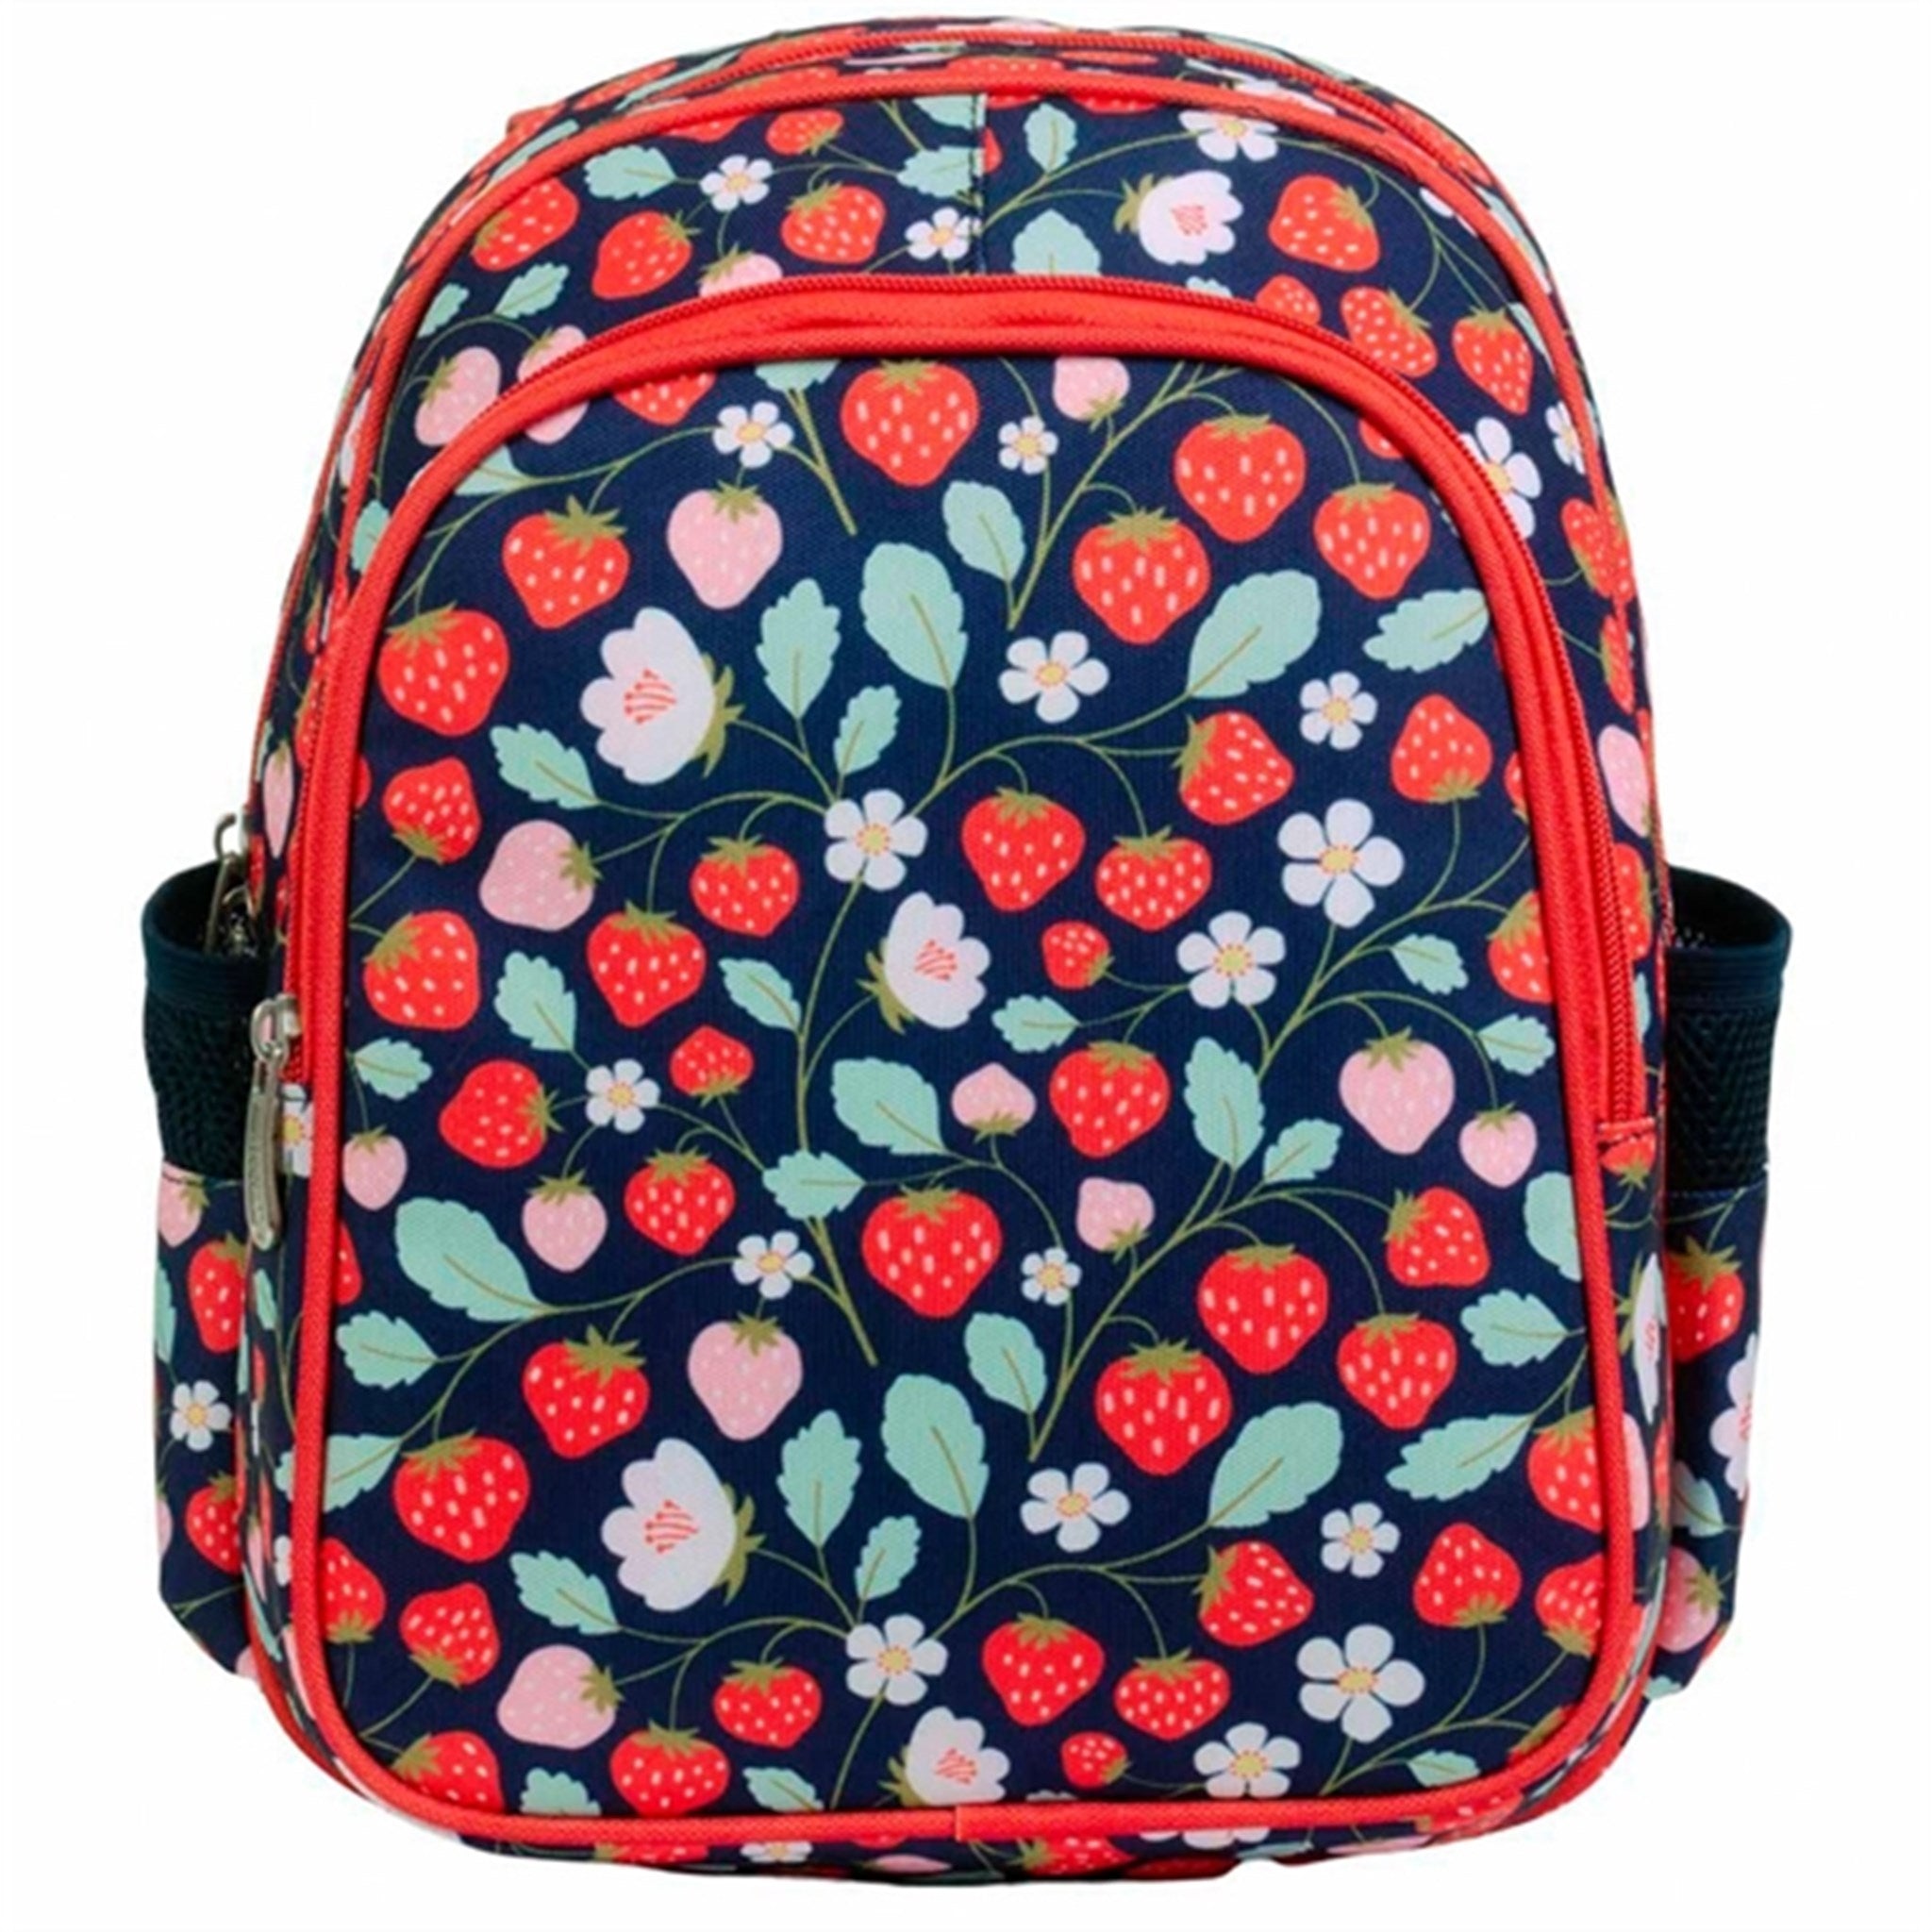 A Little Lovely Company Backpack Strawberries